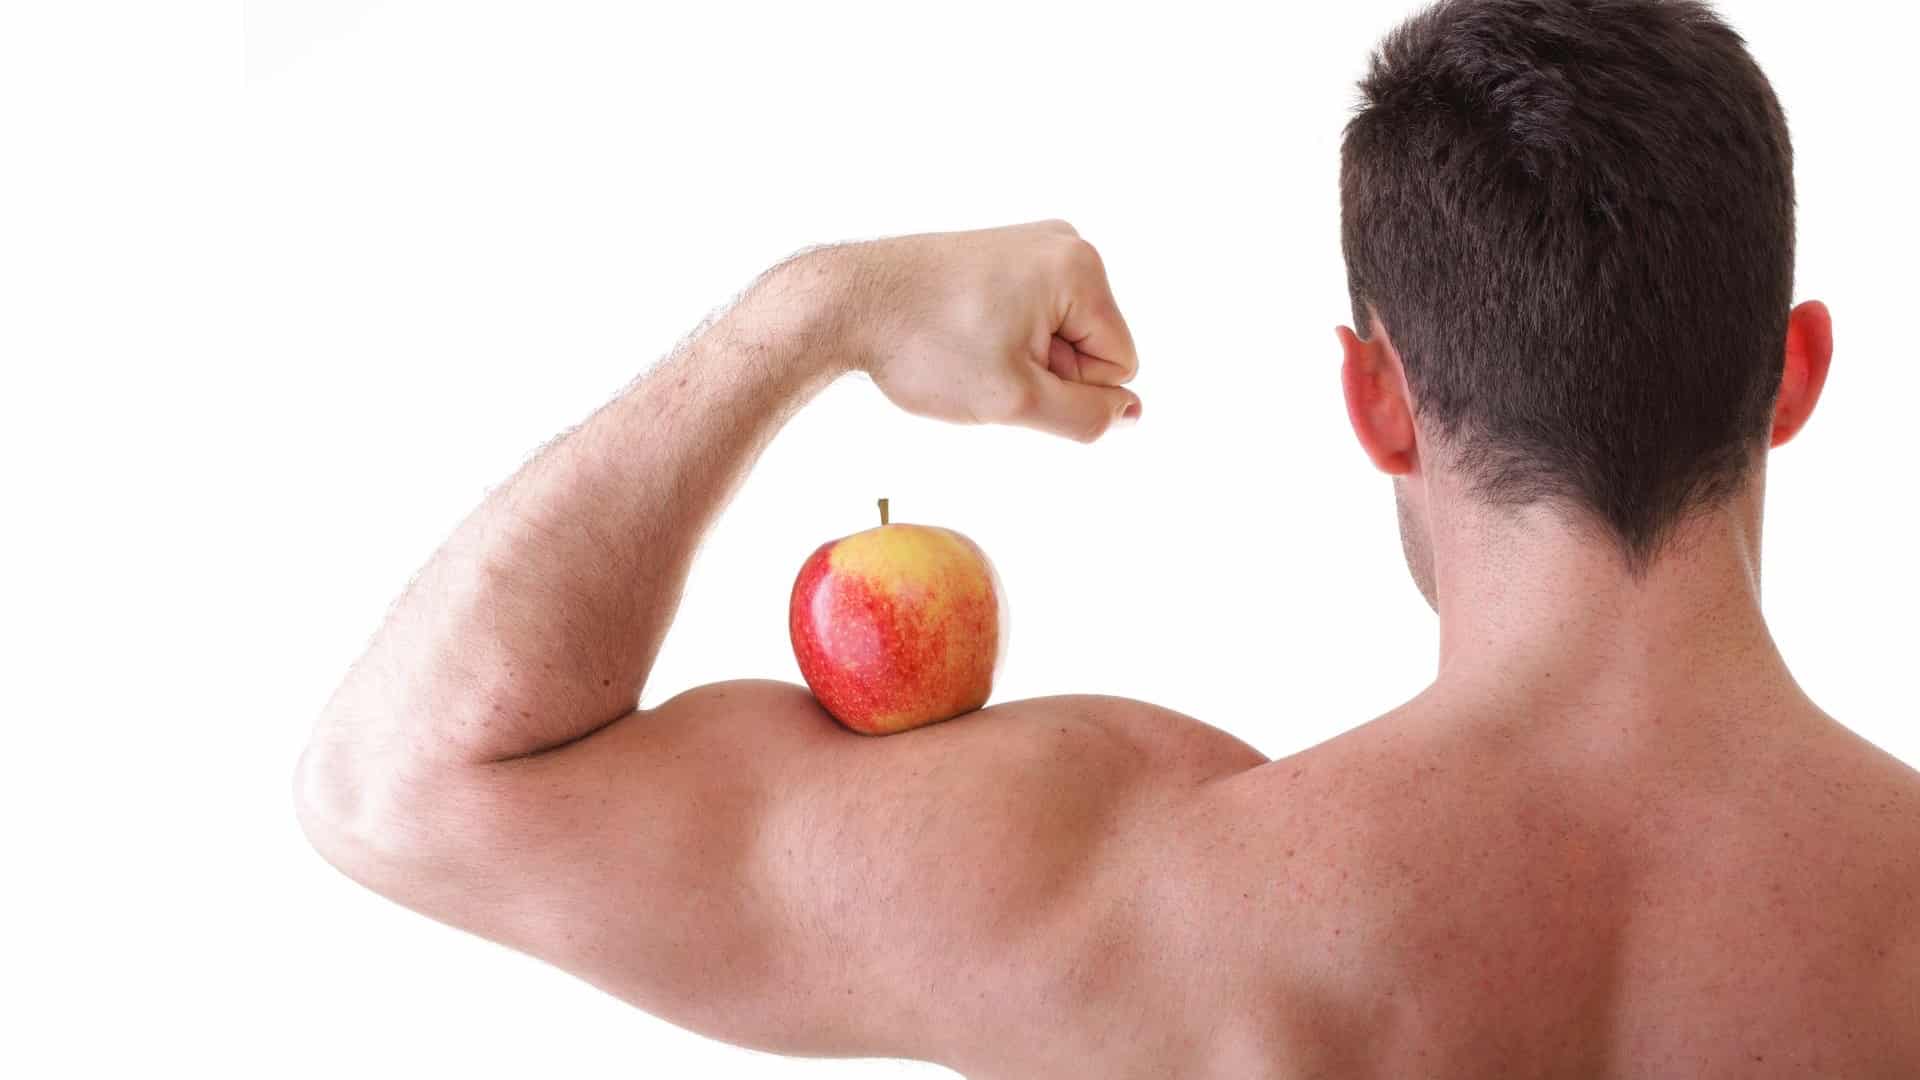 Dietary Pollutants May Affect Testosterone Levels